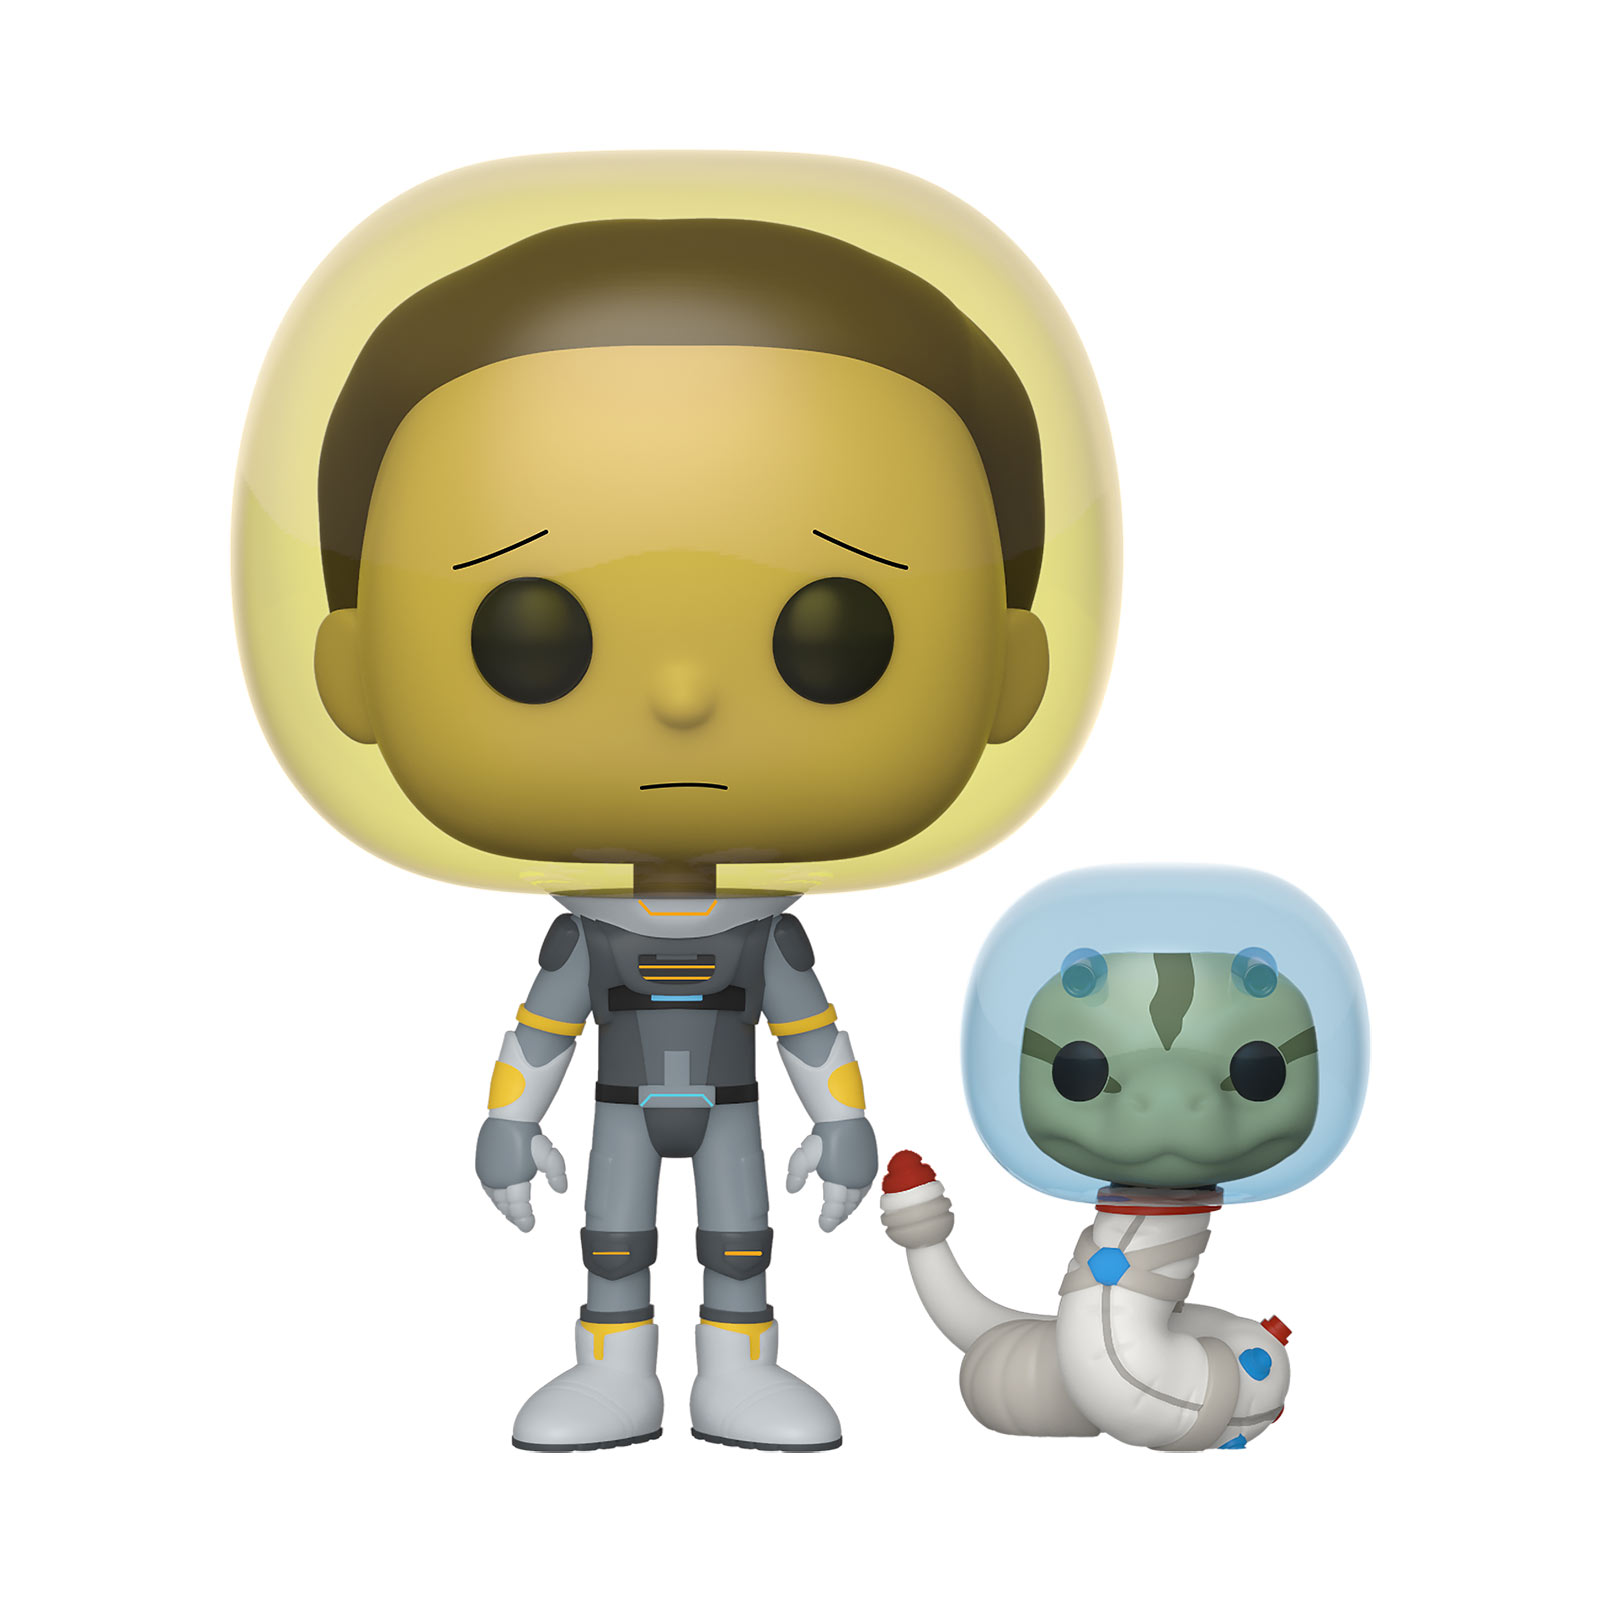 Rick and Morty - Space Suit Morty With Snake Funko Pop Figure